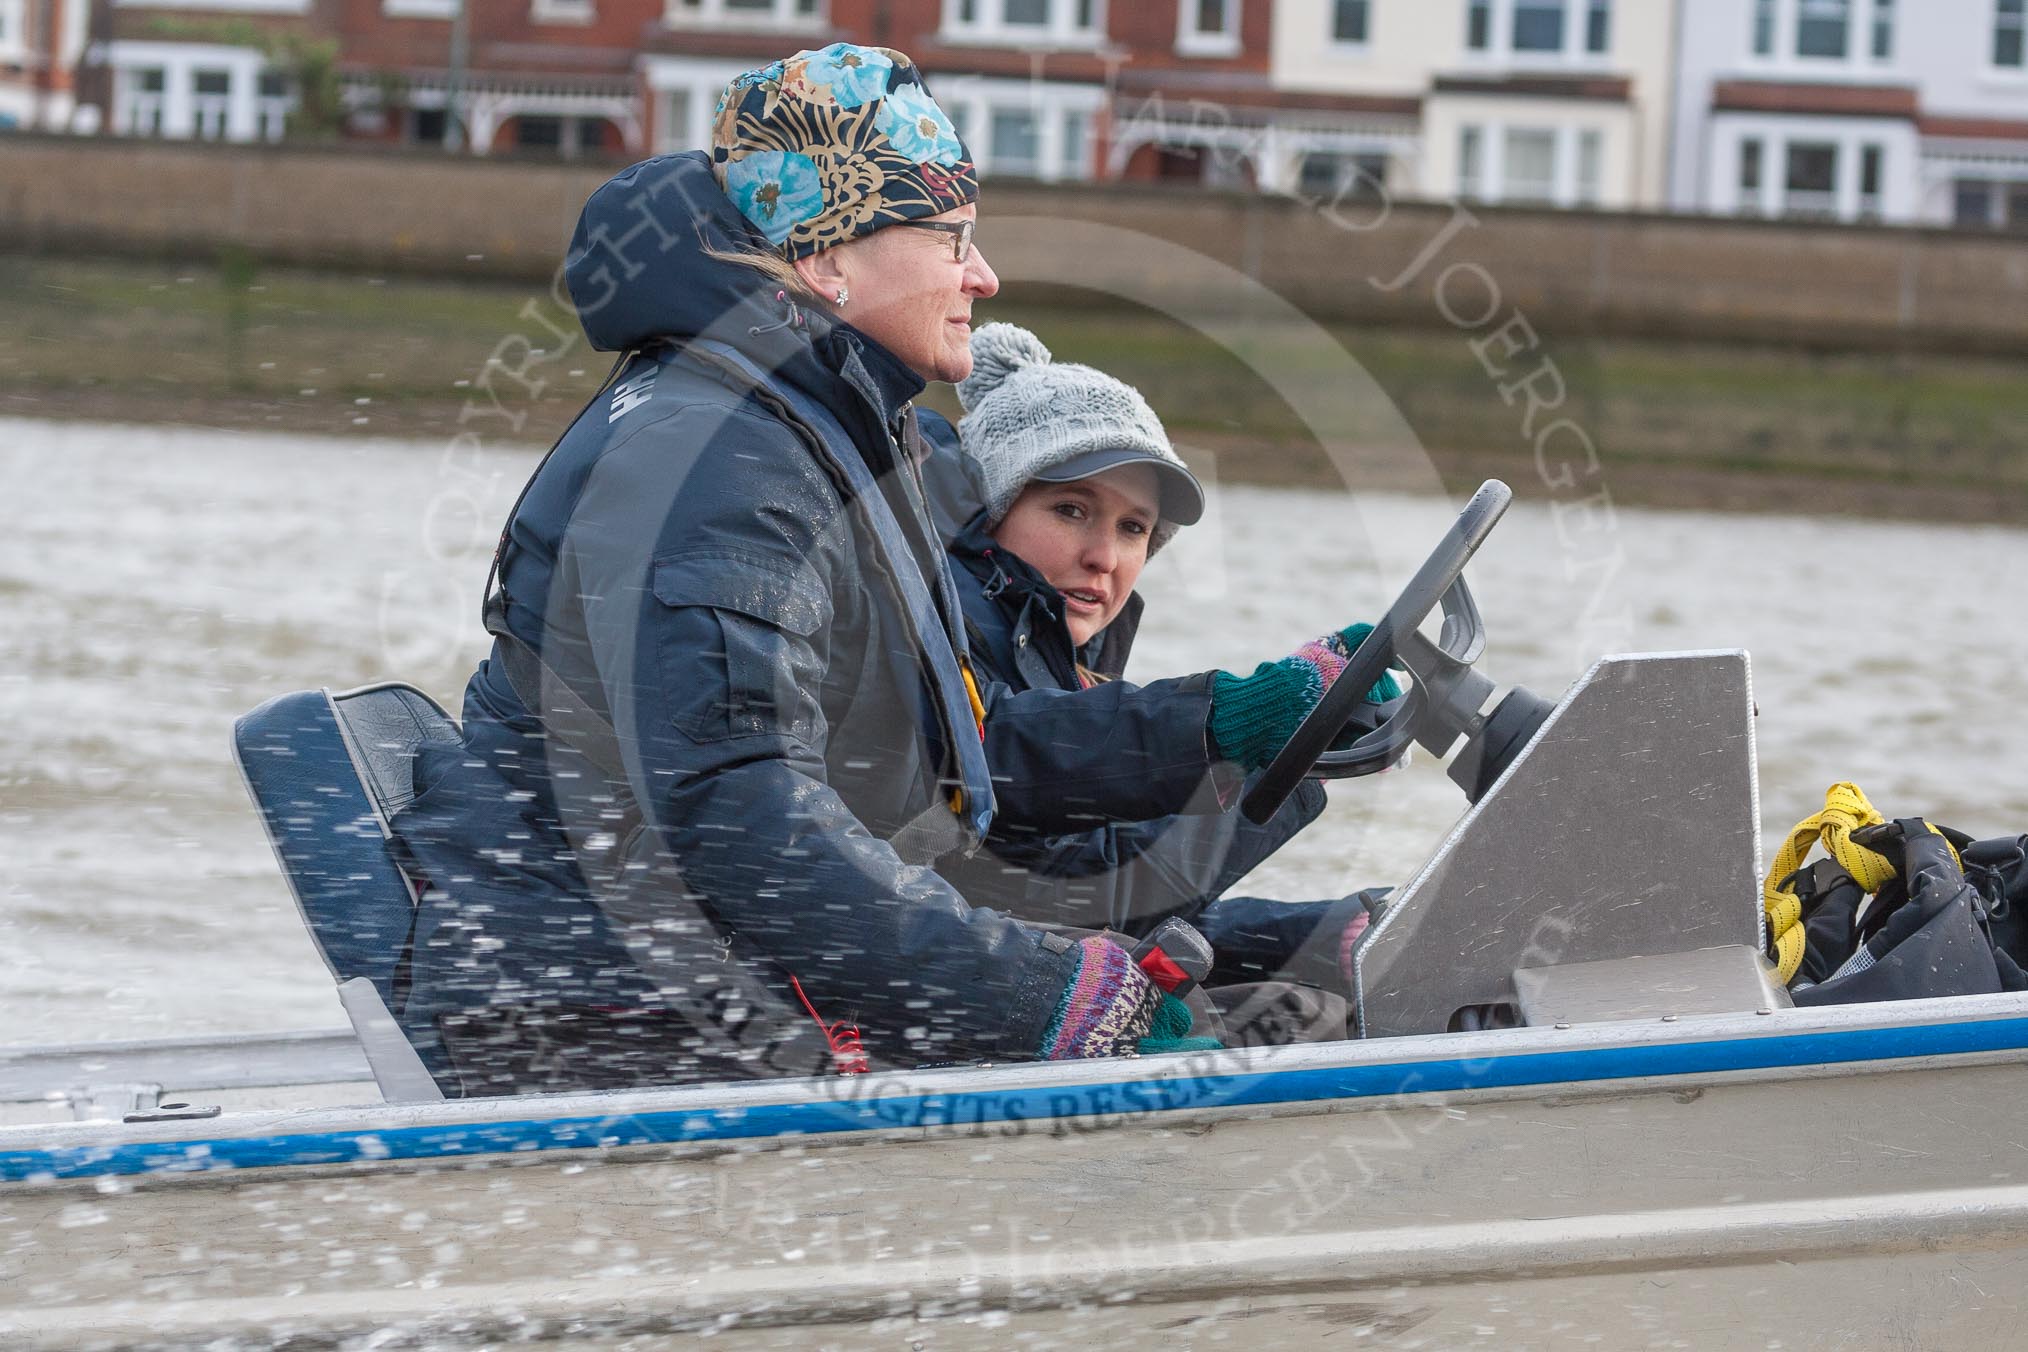 The Boat Race season 2016 - Women's Boat Race Trial Eights (OUWBC, Oxford): OUWBC Head Coach Christine Wilson following the race in the tin boat.
River Thames between Putney Bridge and Mortlake,
London SW15,

United Kingdom,
on 10 December 2015 at 12:33, image #286